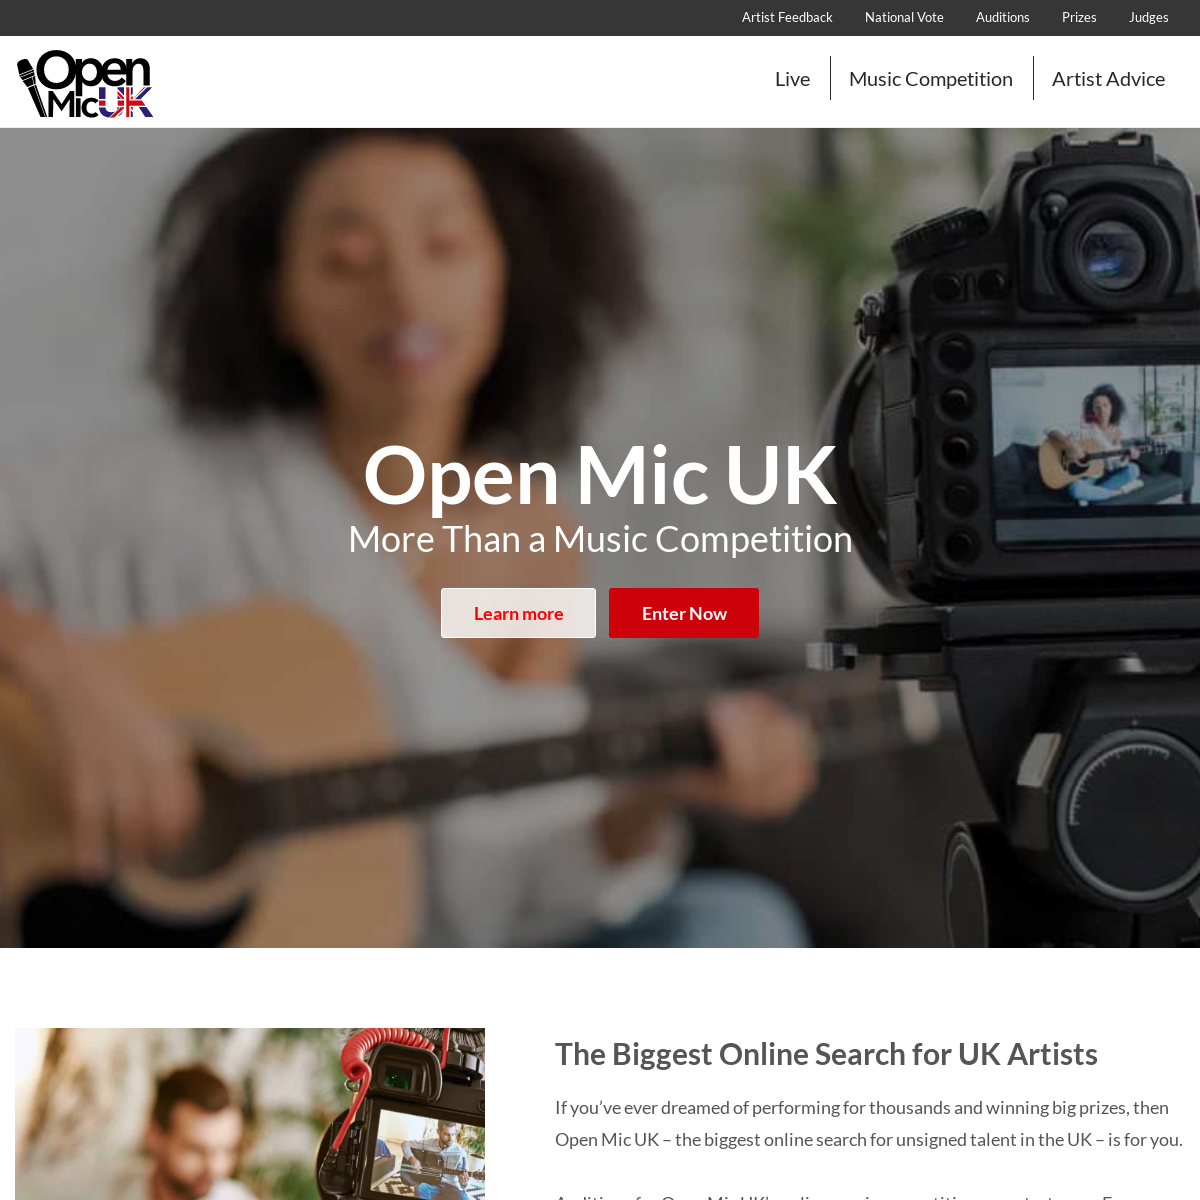 A complete backup of openmicuk.co.uk